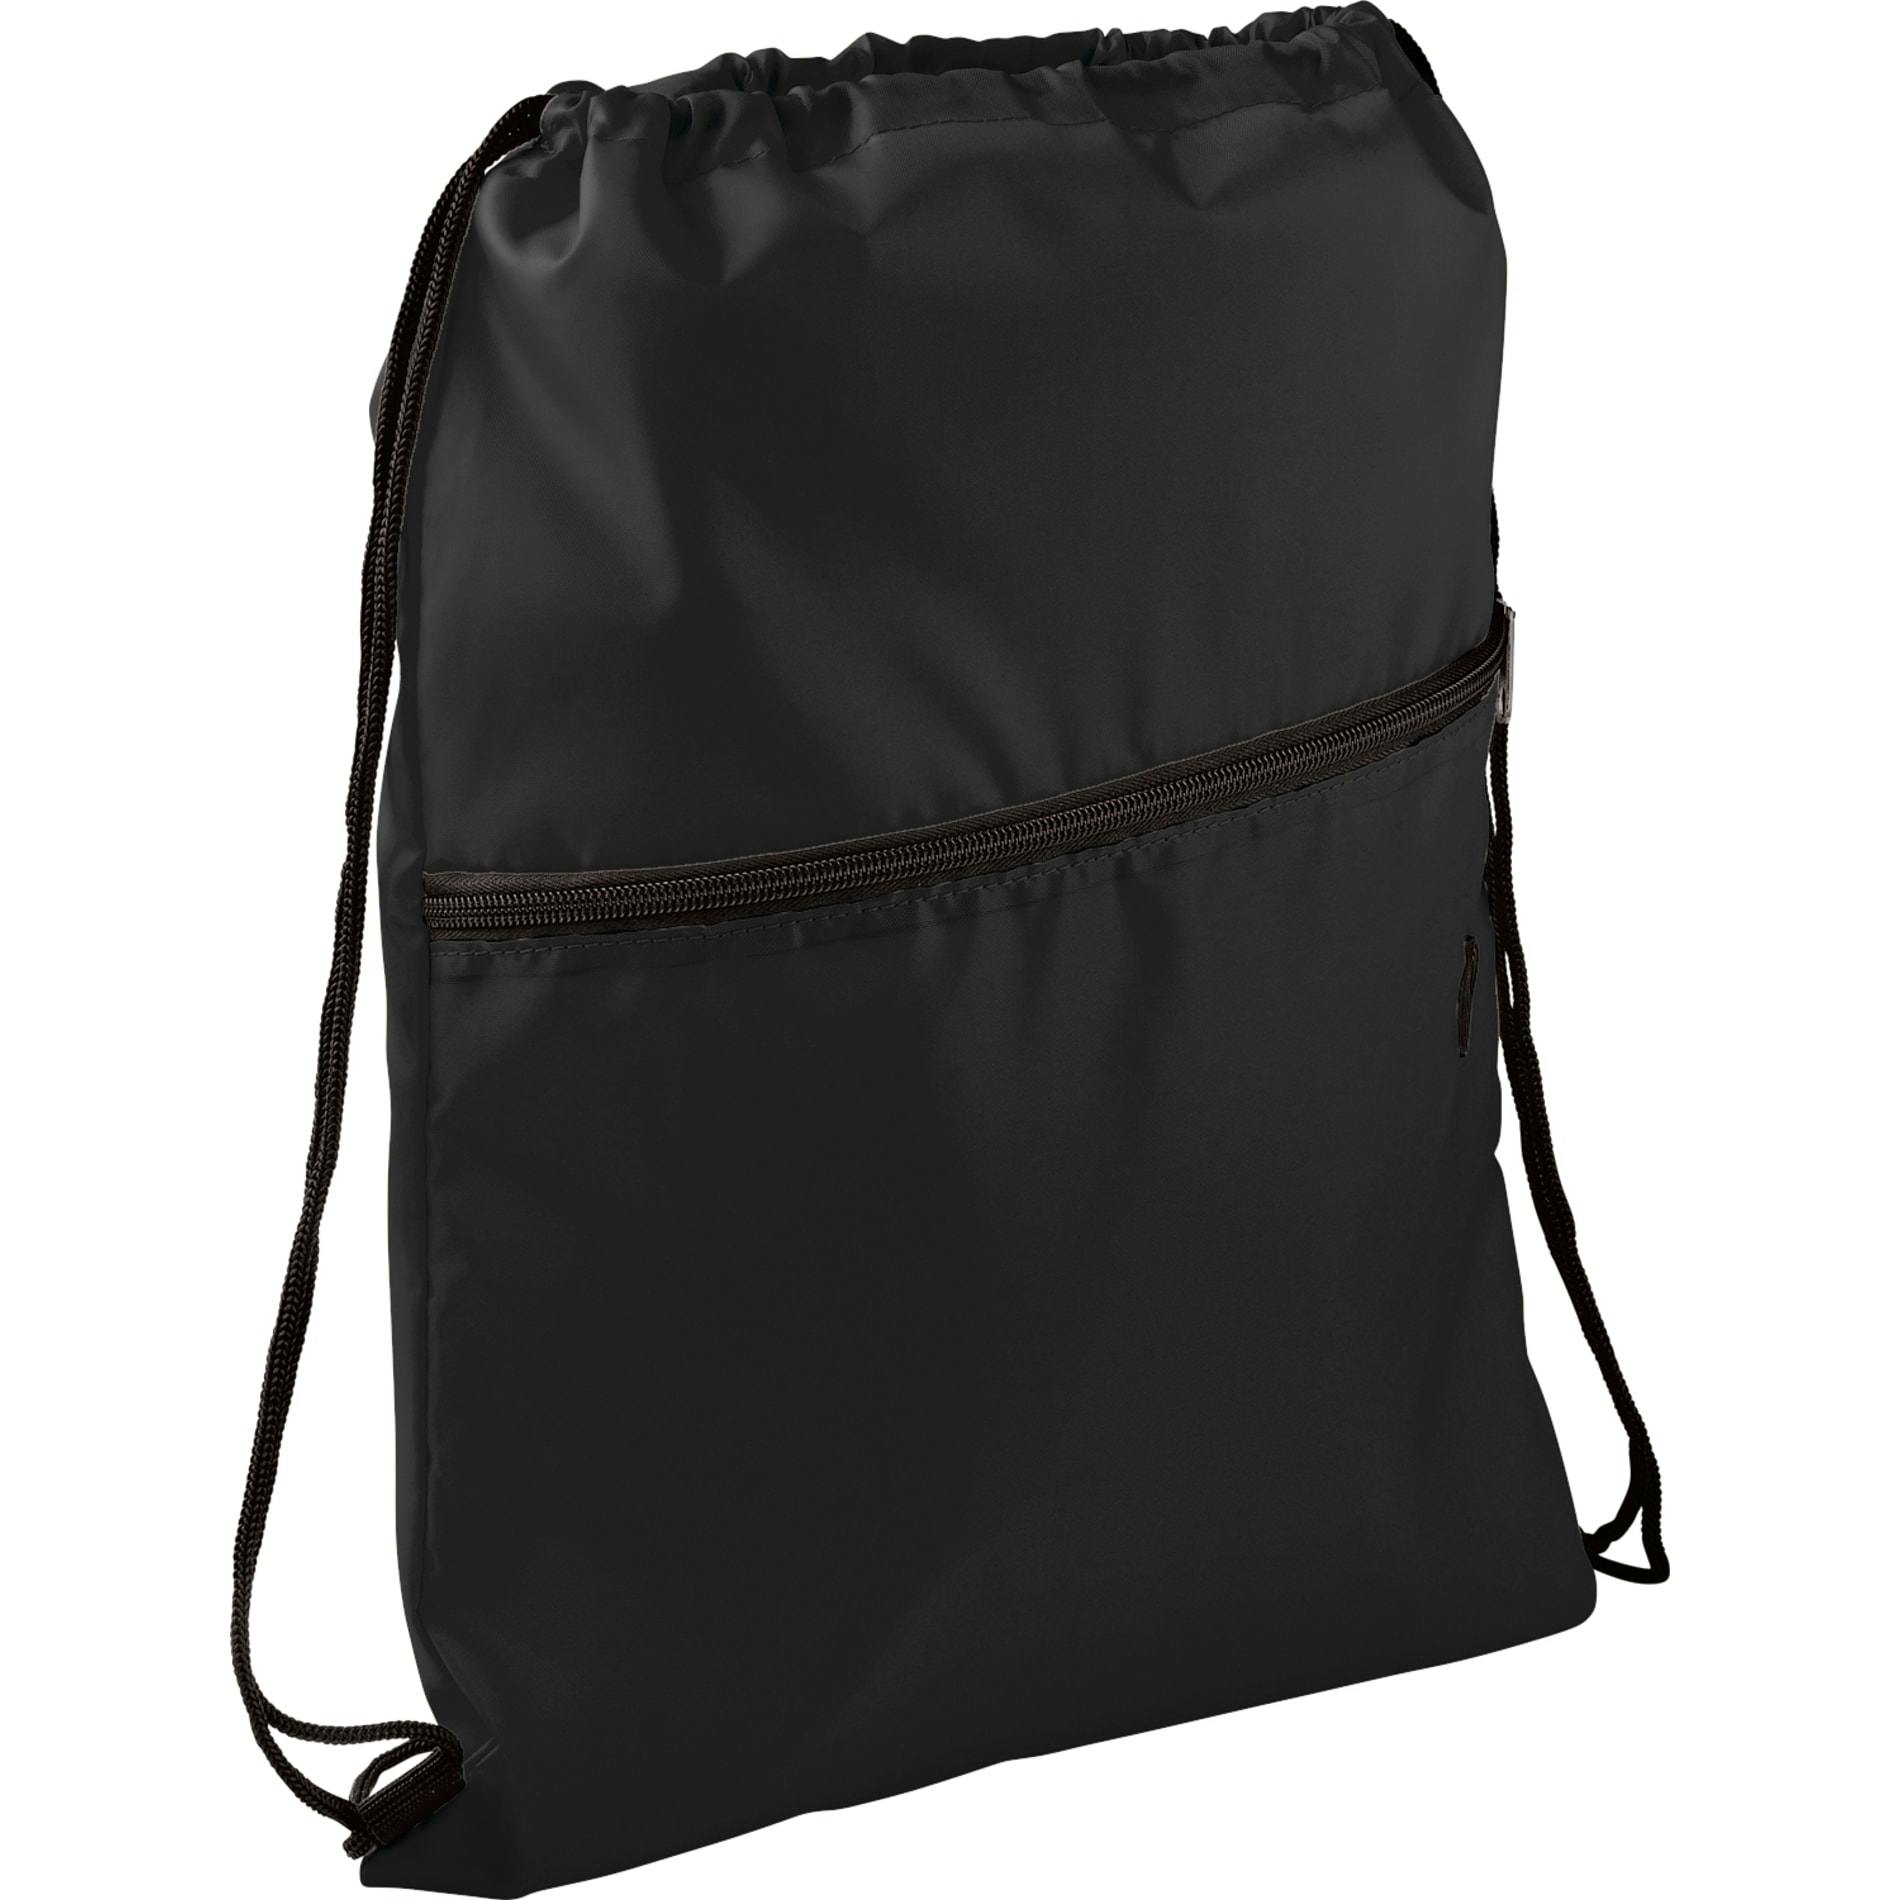 Insulated Zippered Drawstring Bag - additional Image 2